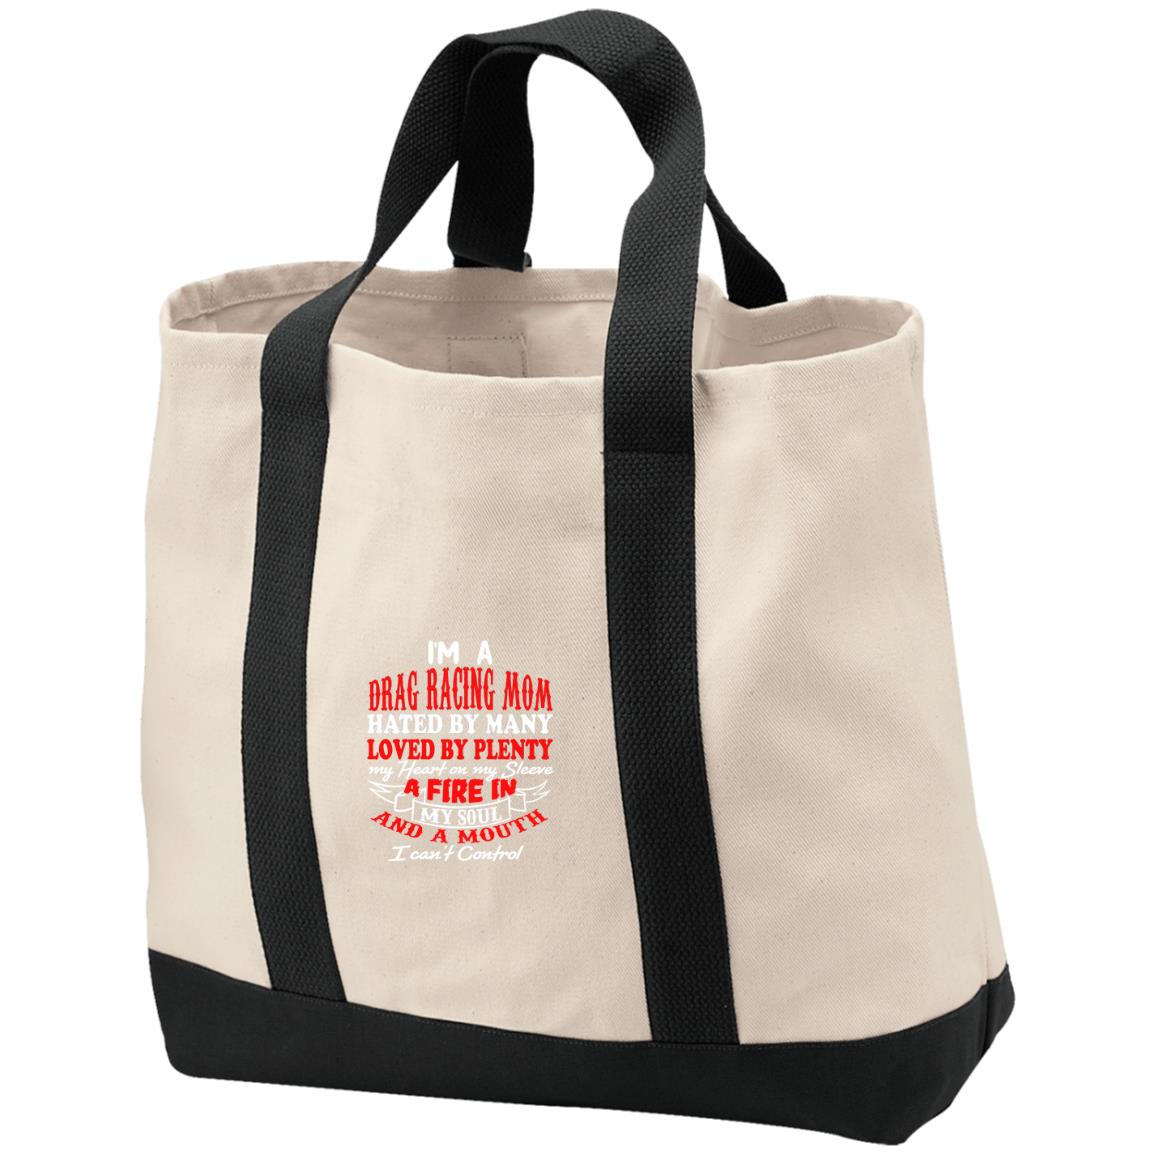 I'm A Drag Racing Mom Hated By Many Loved By Plenty 2-Tone Shopping Tote